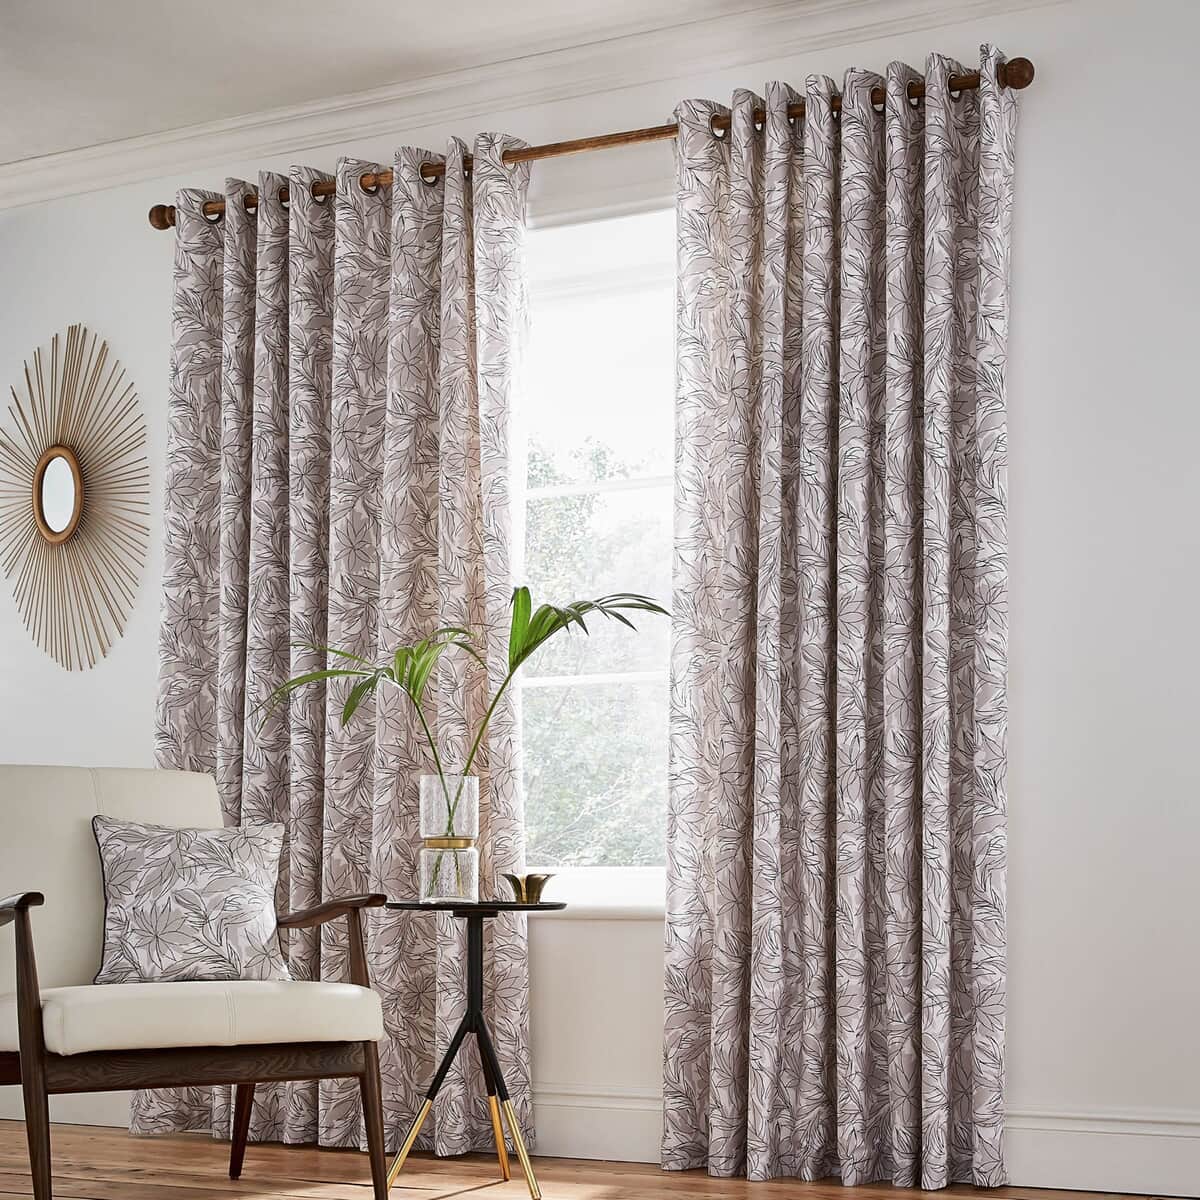 Helena Springfield Oasis Linen Curtains large